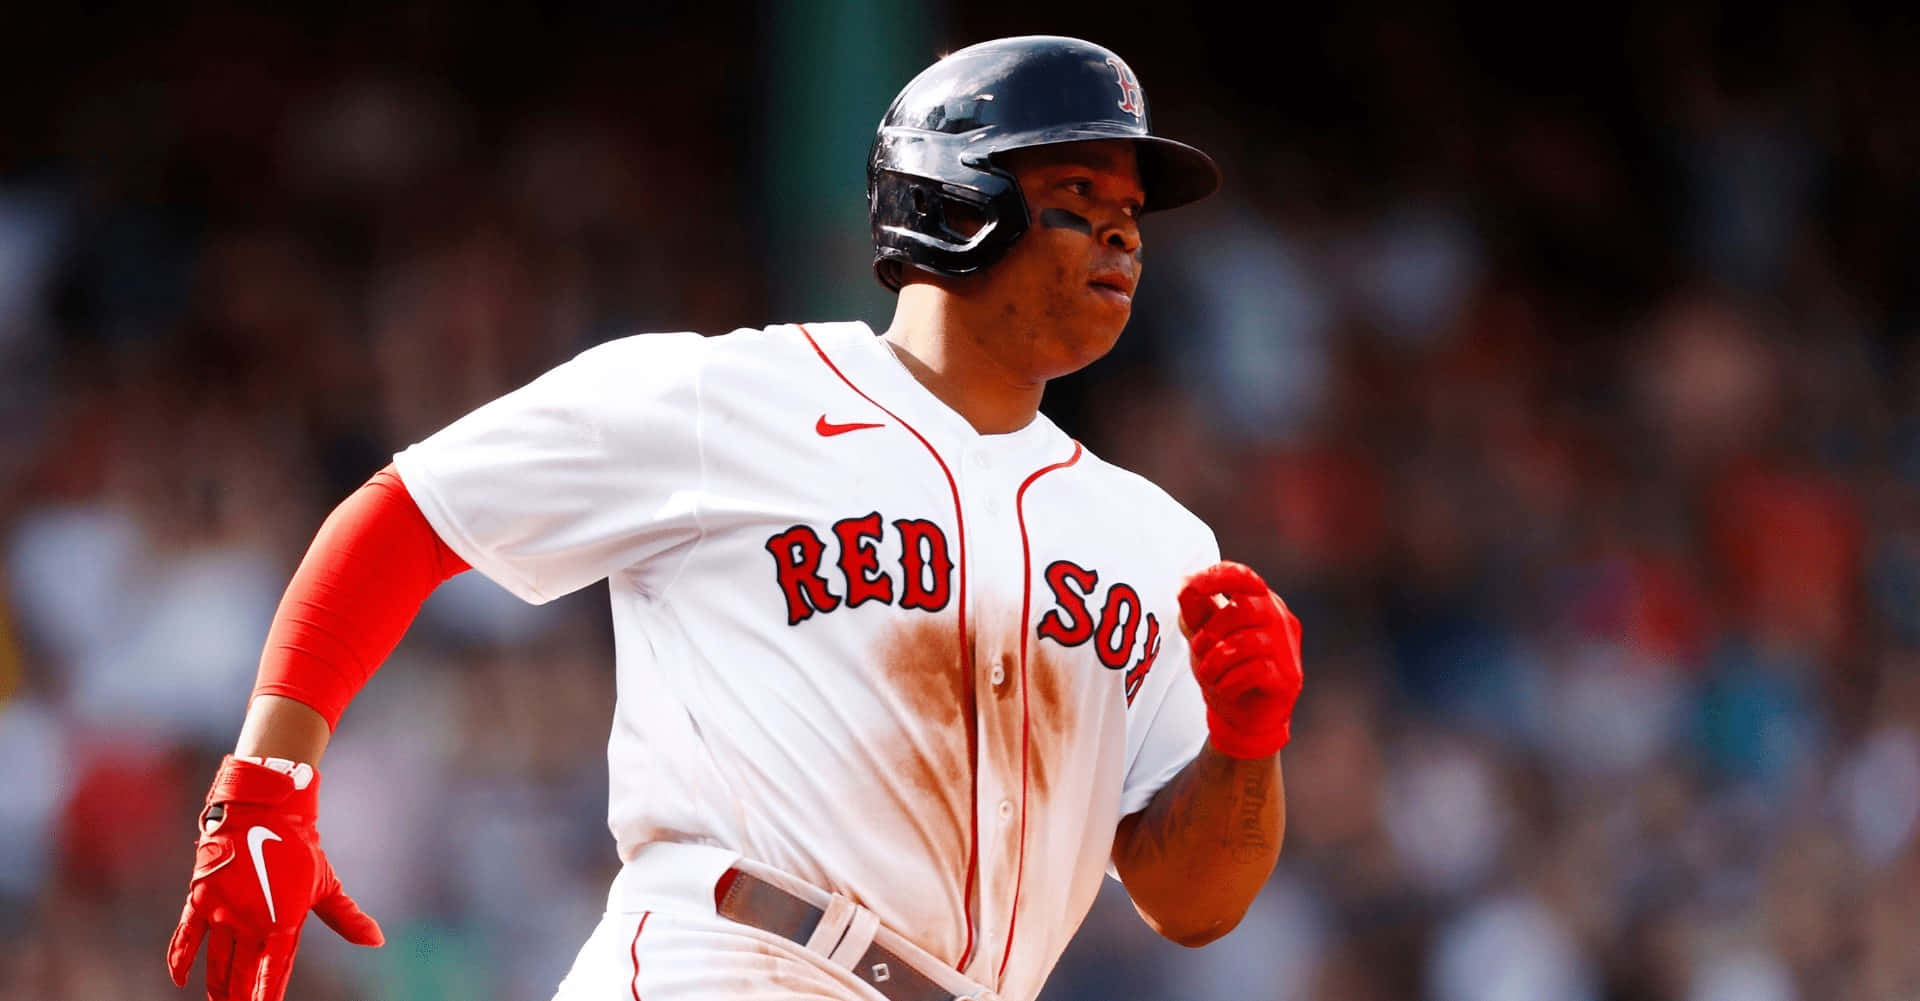 Red Sox Player In Action.jpg Wallpaper